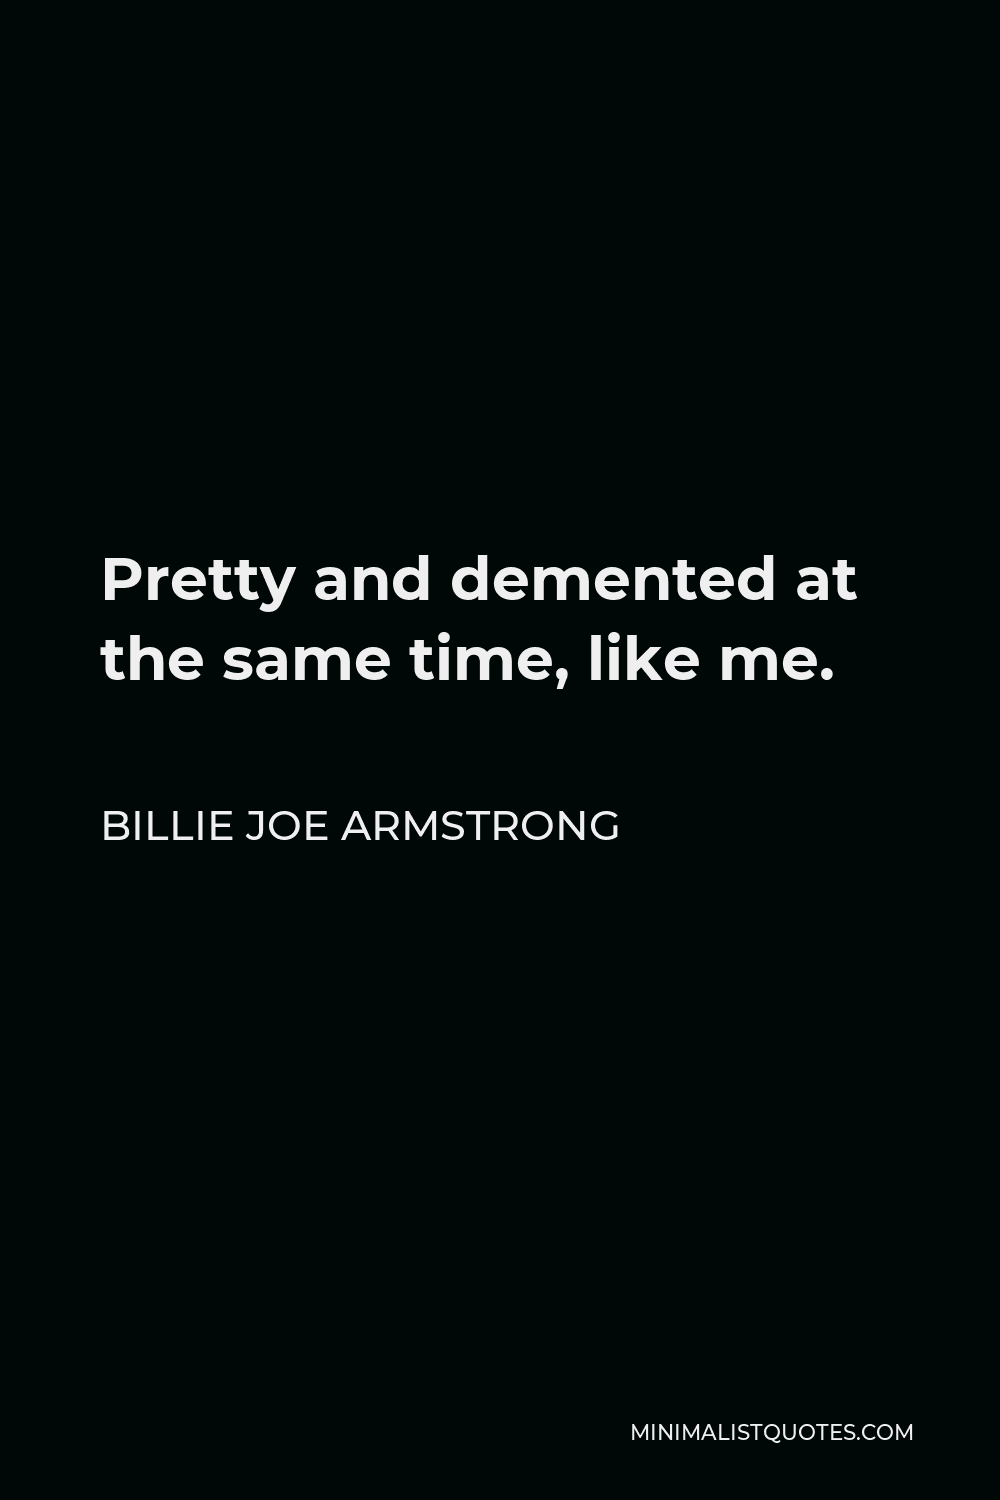 Billie Joe Armstrong Quote You Have To Search The Absolute Demons Of Your Soul To Make A Great